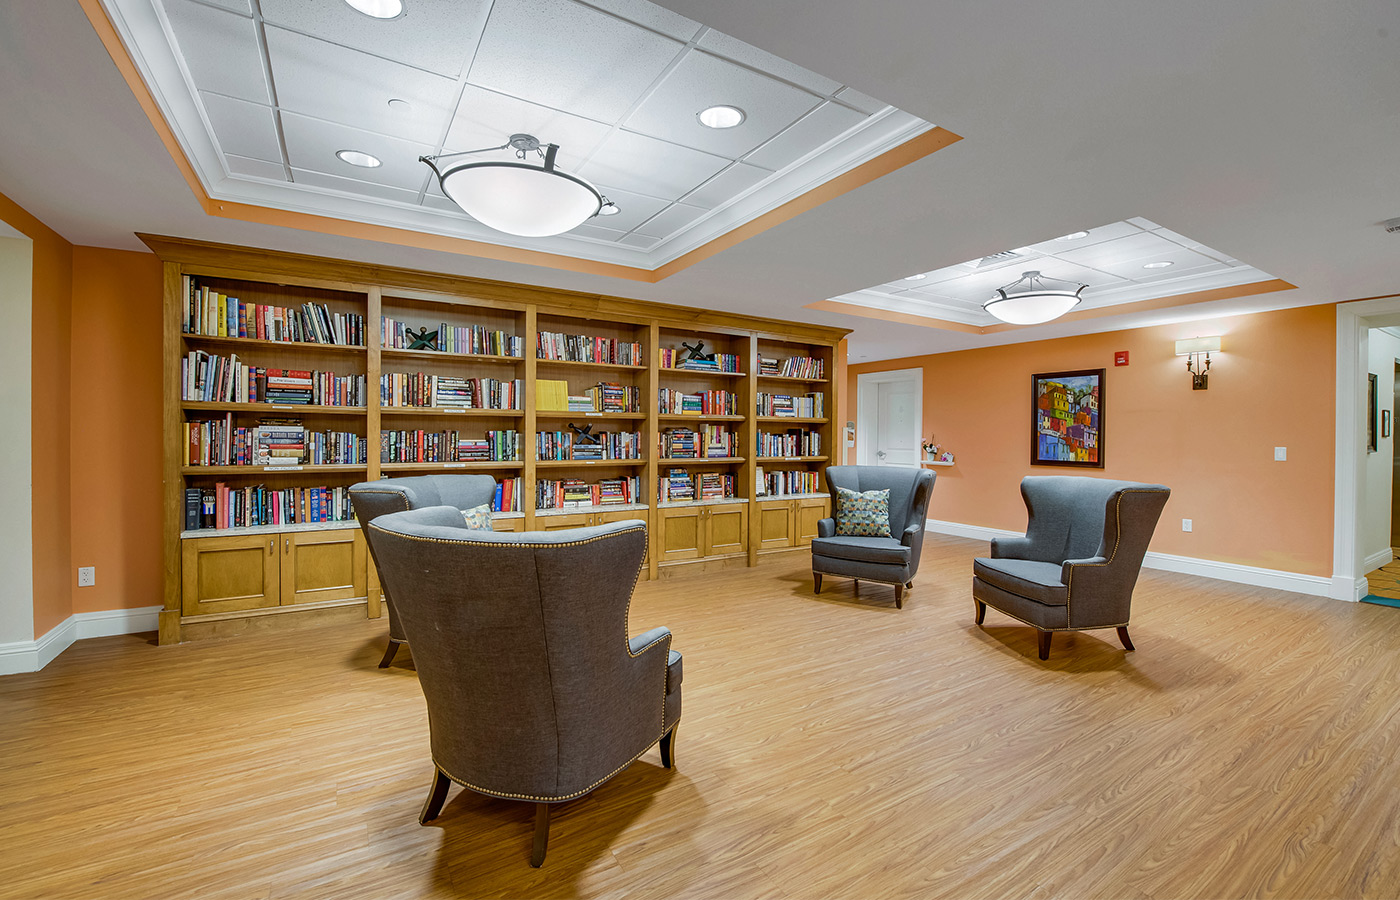 Library filled with books and seating area.
